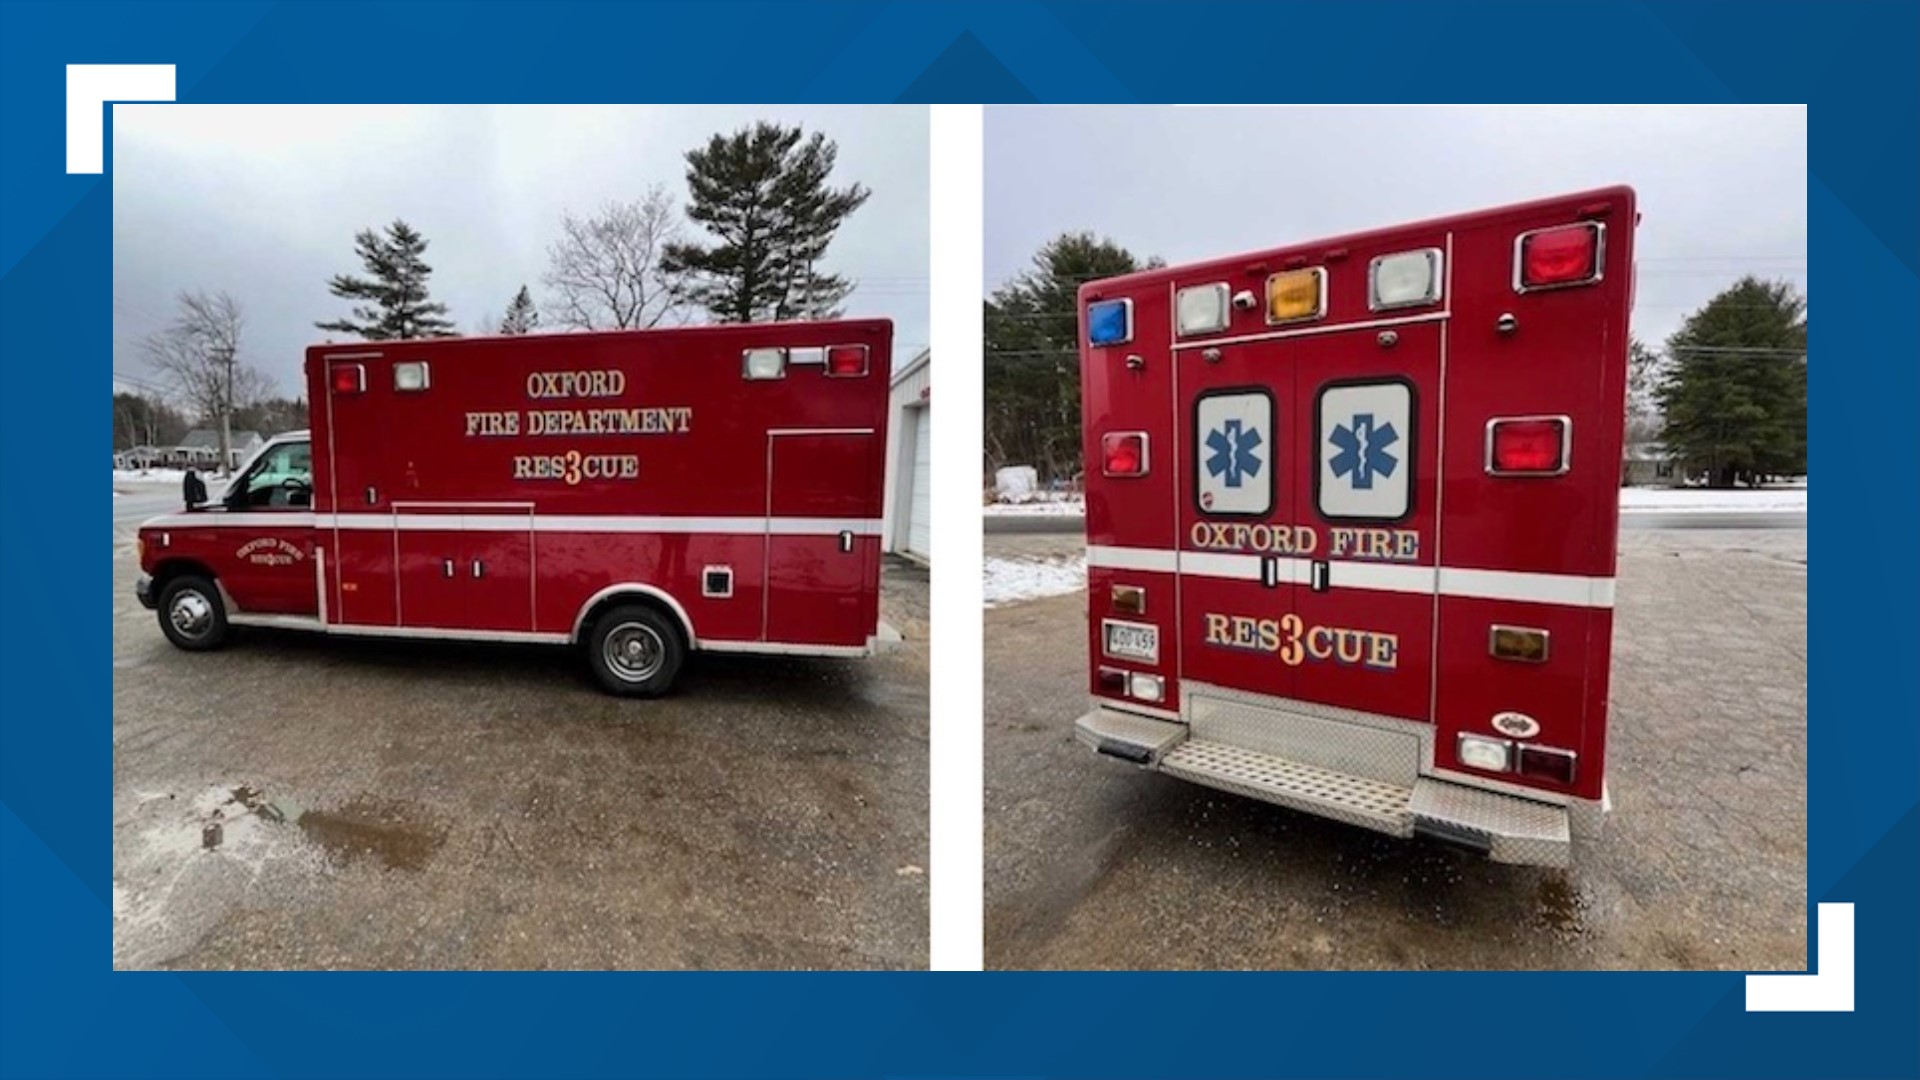 The ambulance is one of three Oxford vehicles up for bid, including a fire truck.